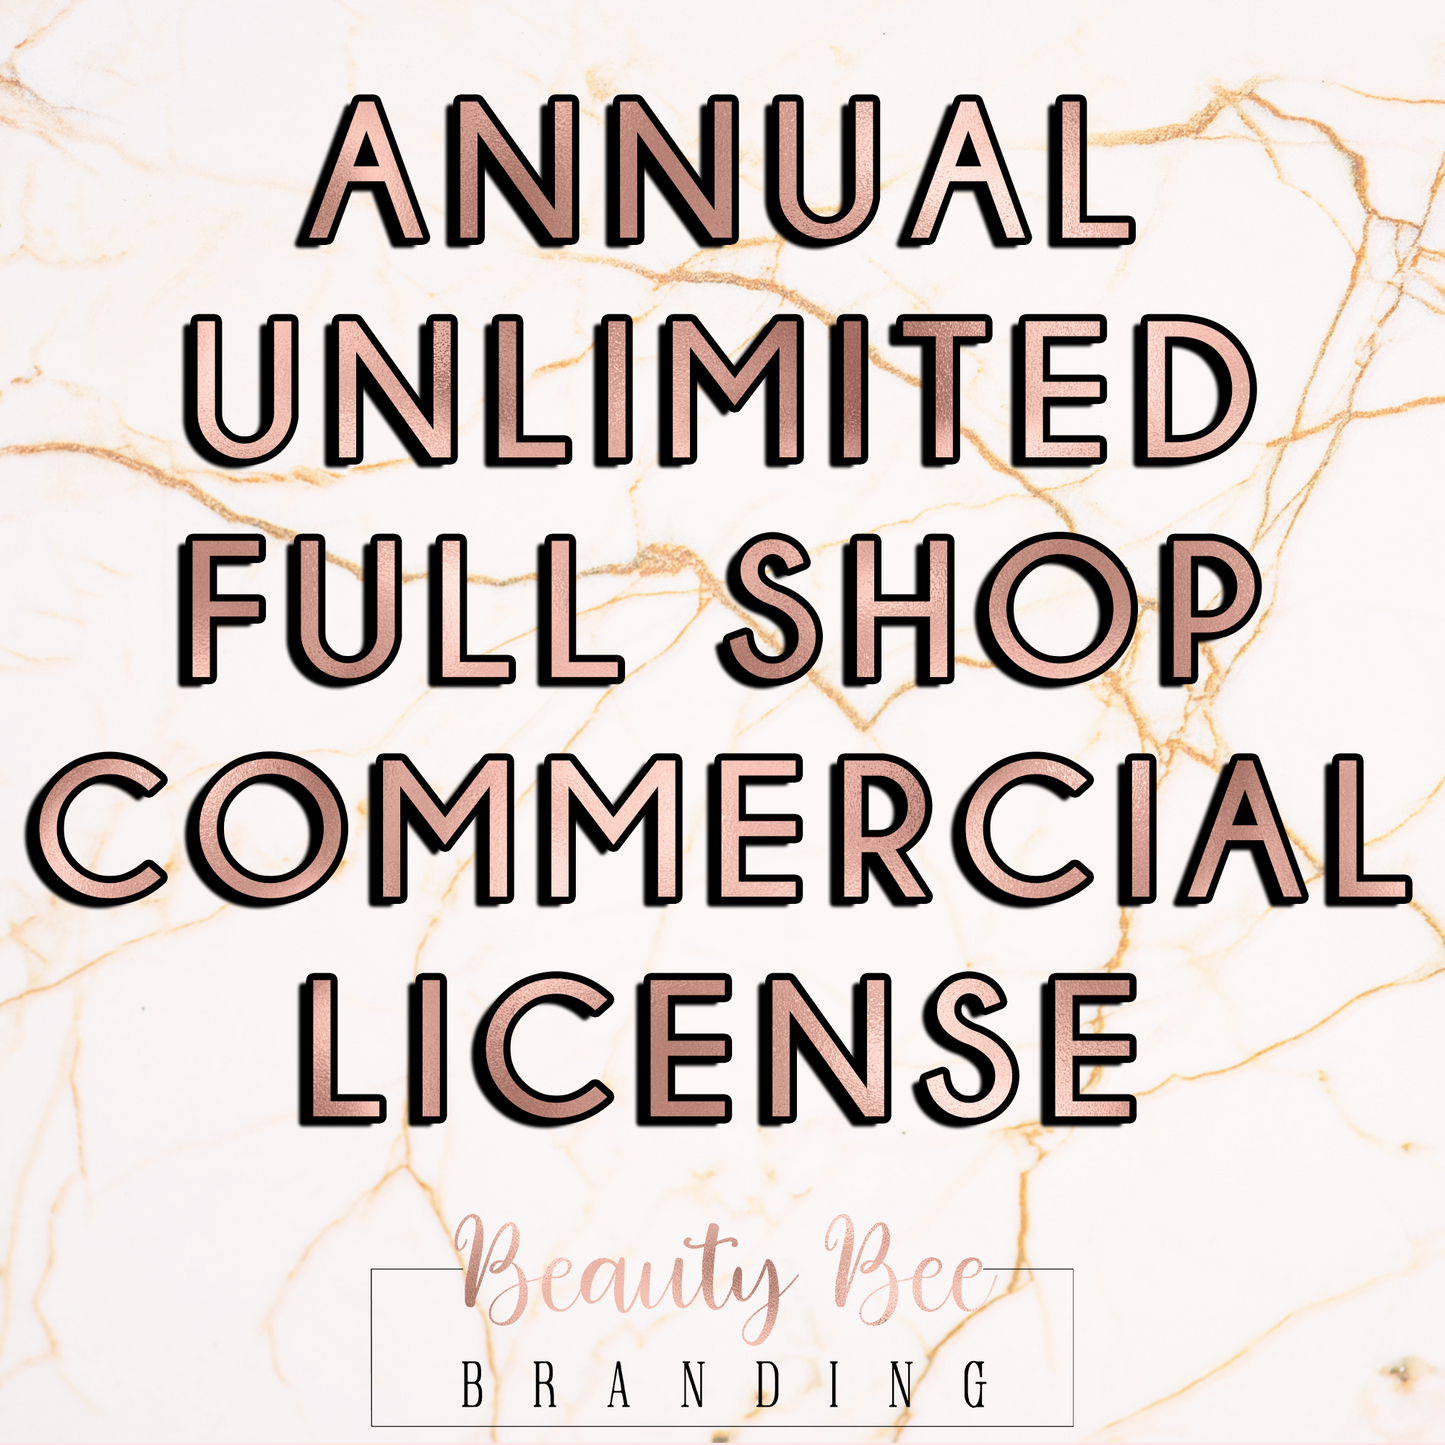 ADD ON Annual Unlimited Full Shop Commercial License